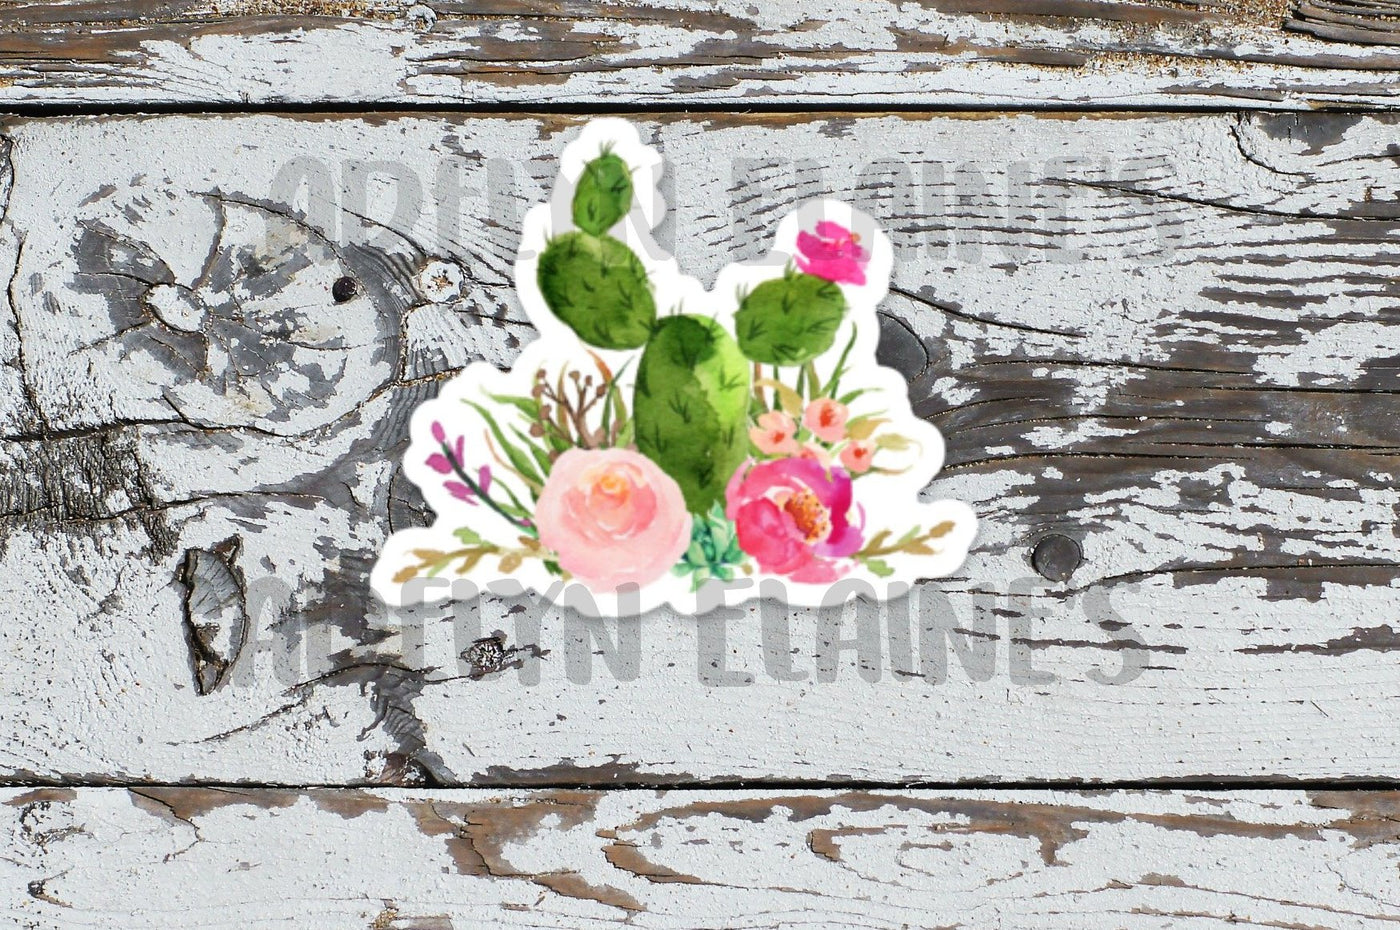 Cactus Bouquet Sticker-402 MISC GIFTS-Adelyn Elaine's-Adelyn Elaine's Boutique, Women's Clothing Boutique in Gilmer, TX